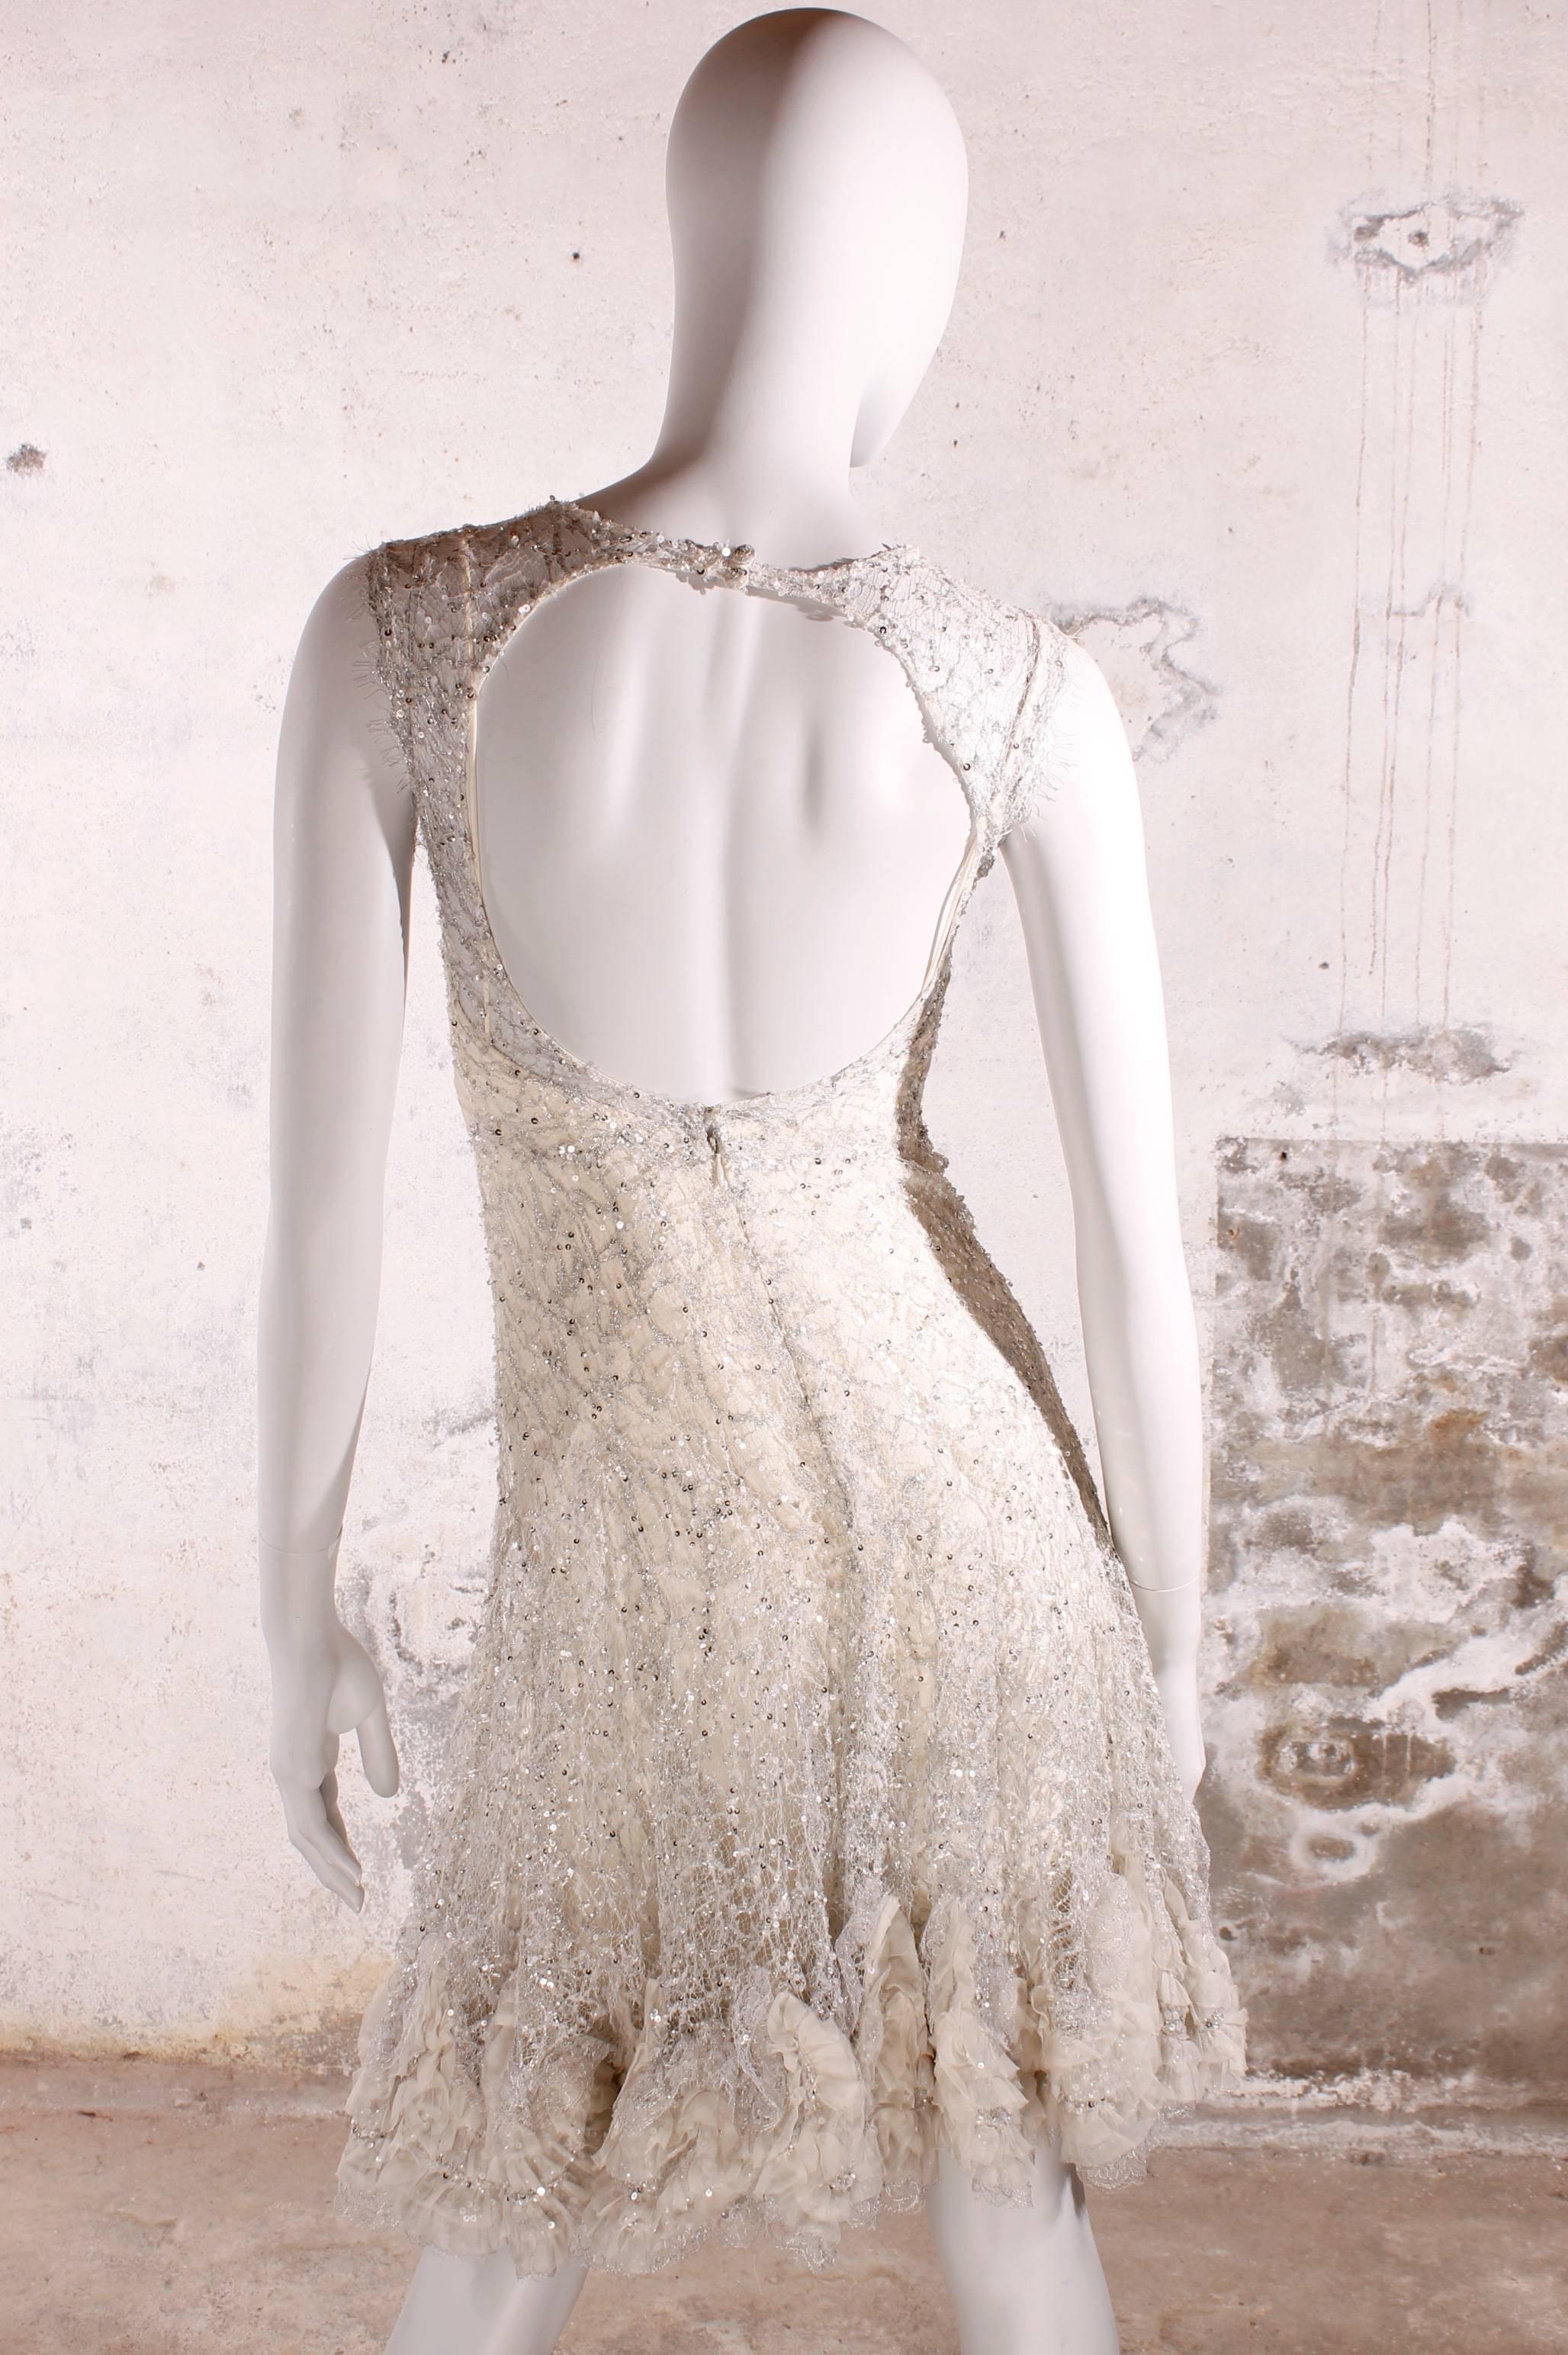 Fantastic Elie Saab haute couture evening dress/cocktail dress in diaphanous white lace covered with silver sequins. Very very exclusive!

At the hem a ruffle trim in silk and a large off-white silk bow at the front. Small spaghetti-straps, a layer